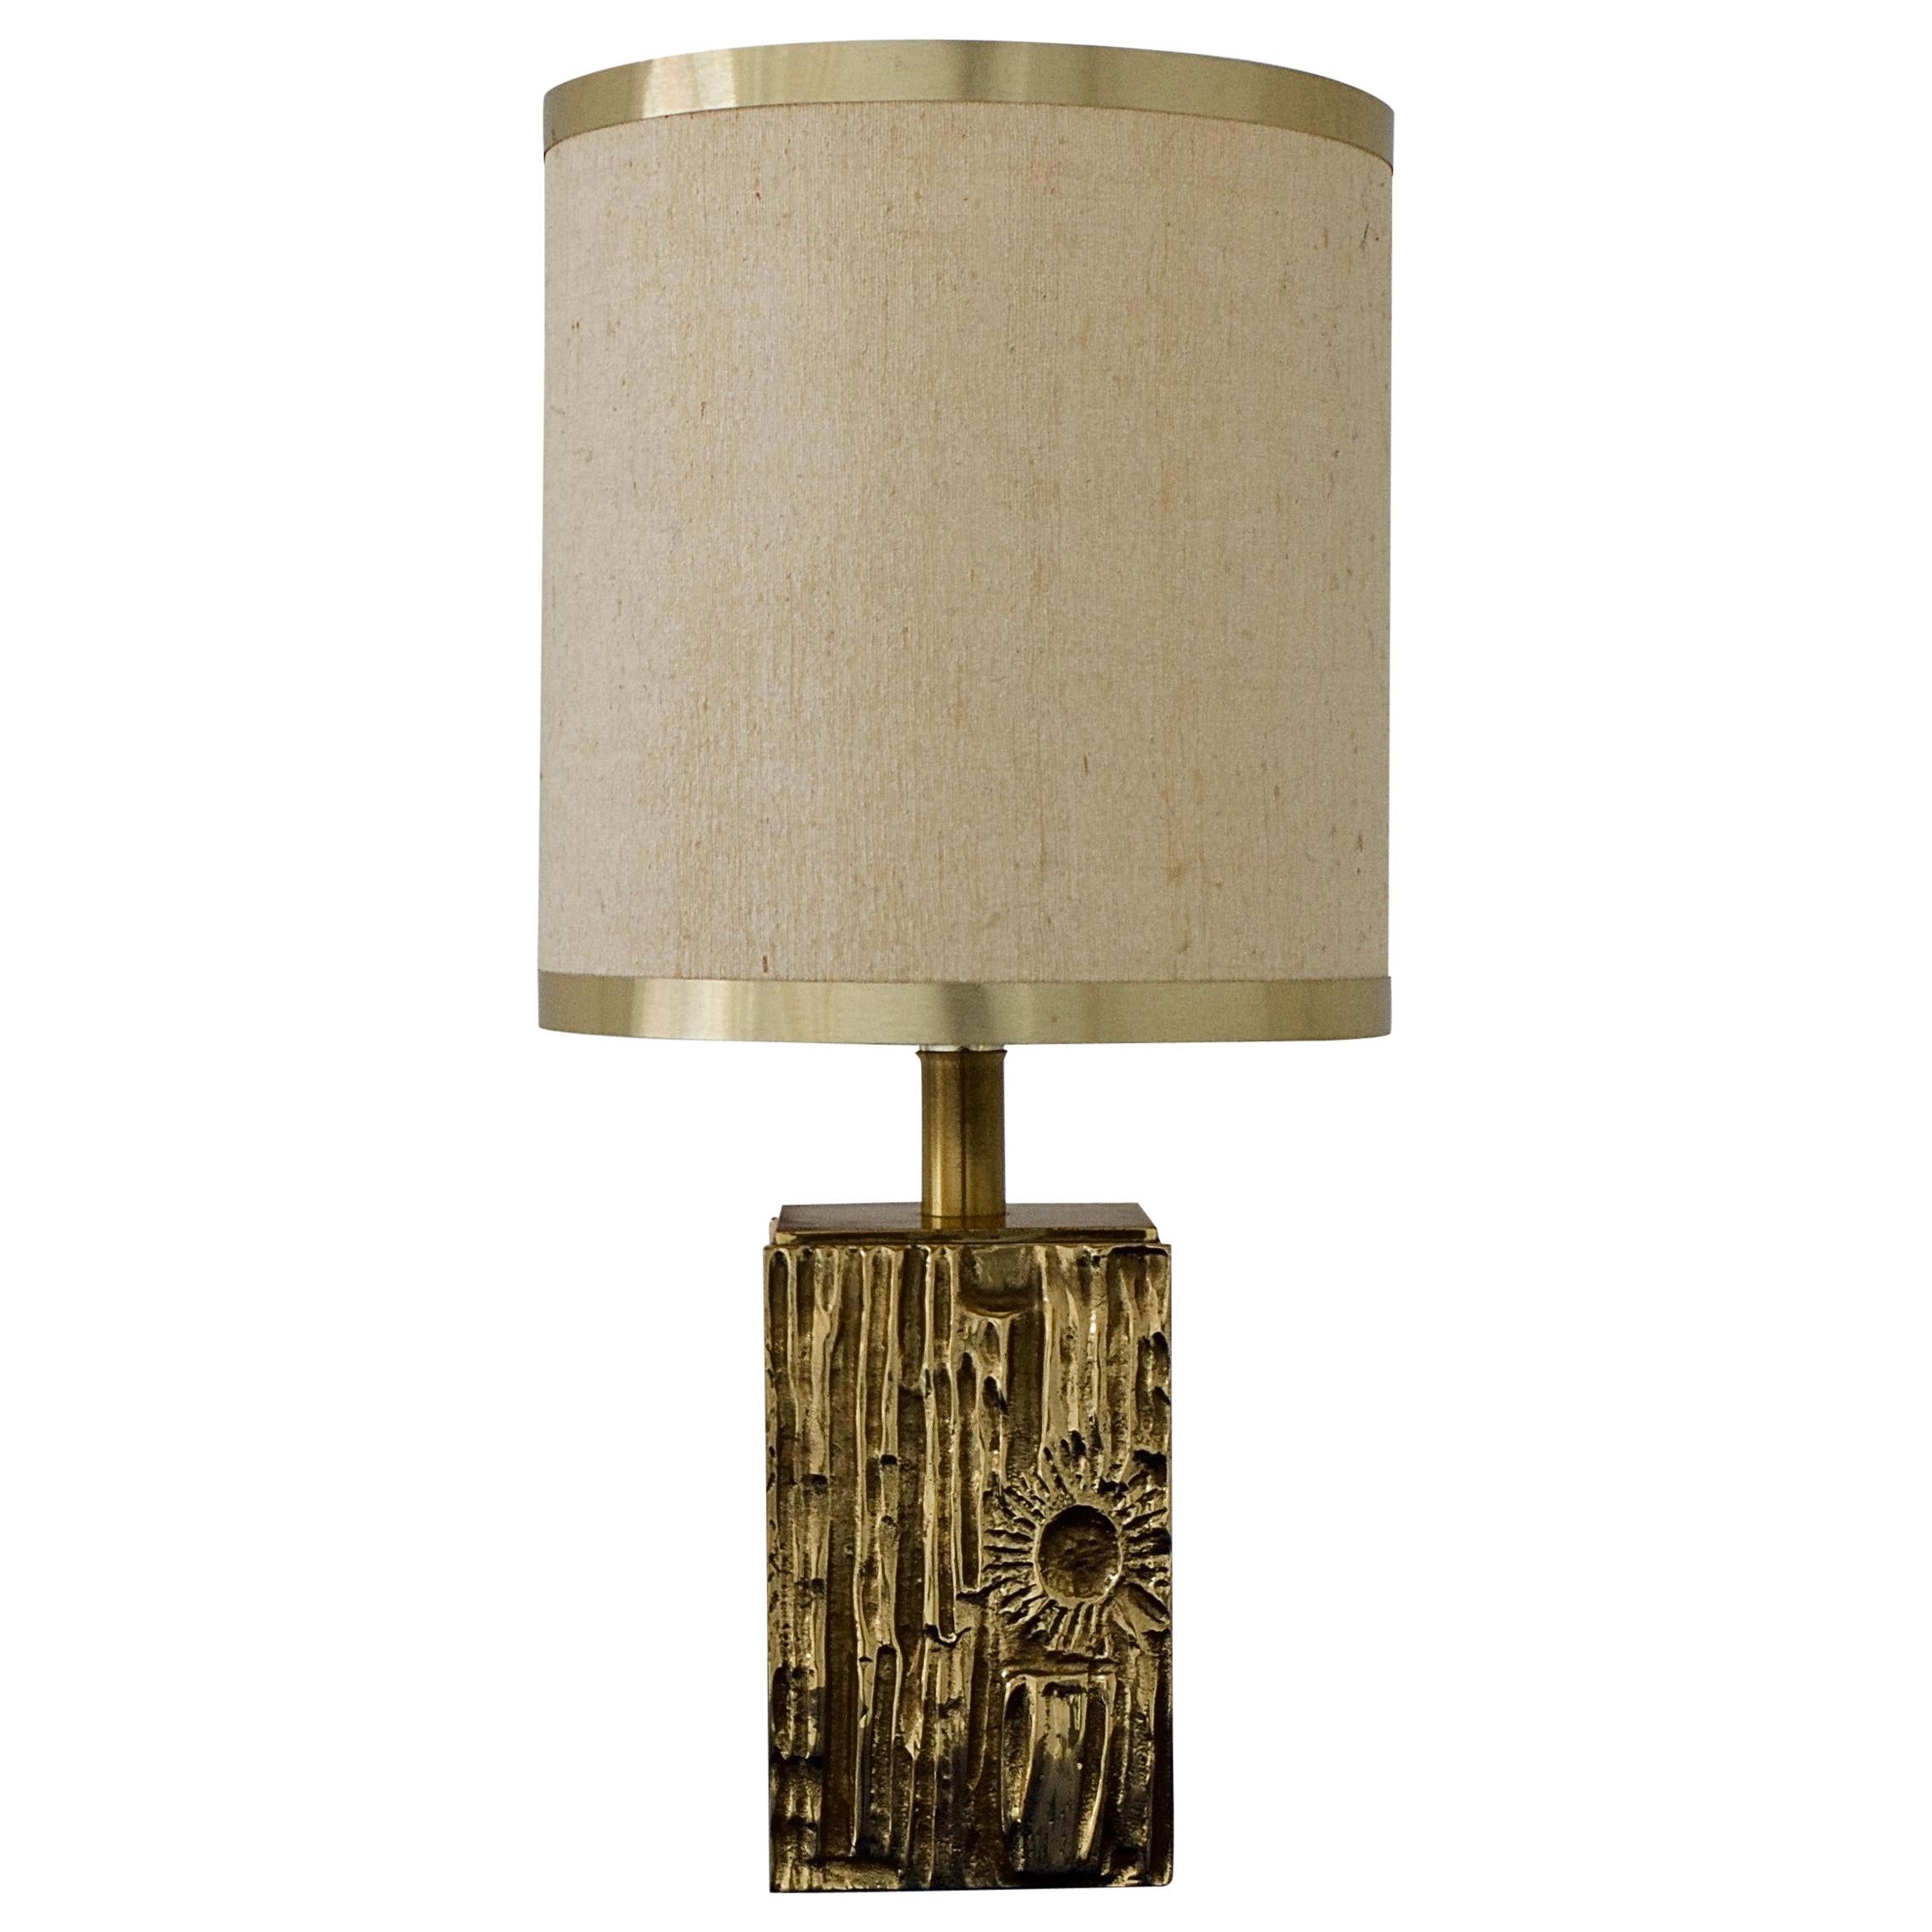 Brass Table Lamp Attributet to Luciano Frigerio by Frigerio Di Diseo, Italy